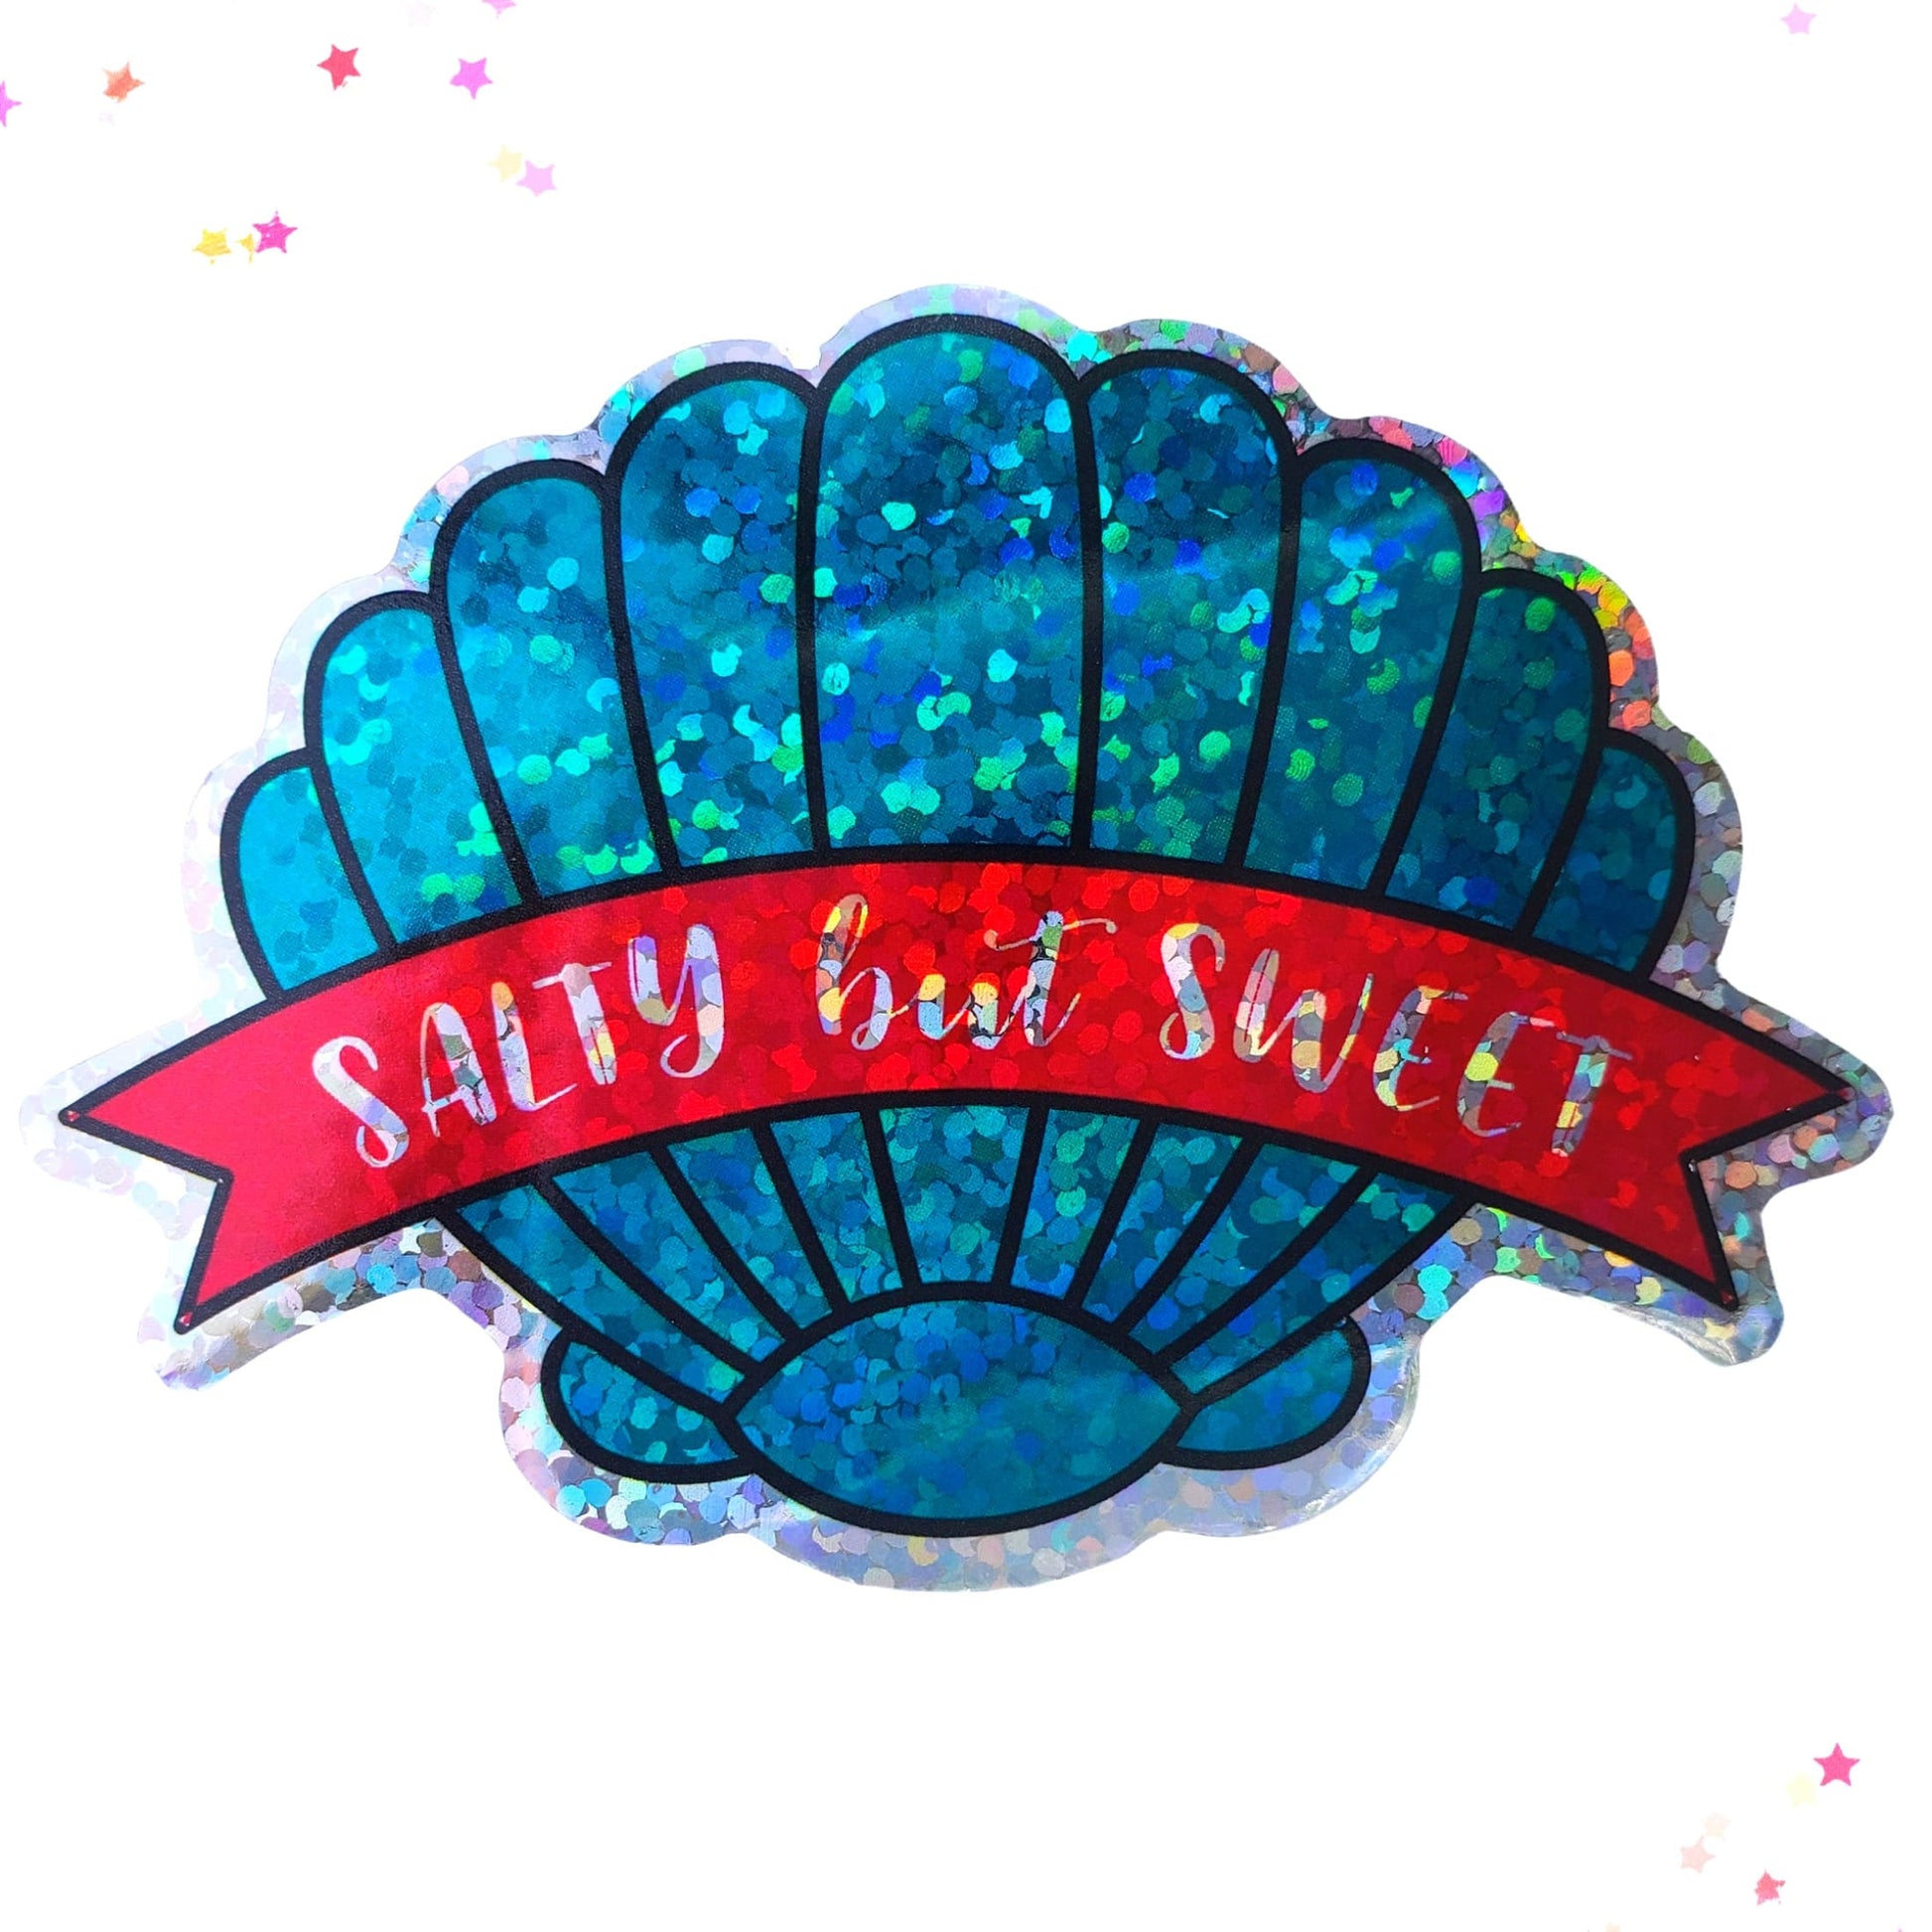 Premium Sticker - Sparkly Holographic Glitter Salty But Sweet from Confetti Kitty, Only 2.00